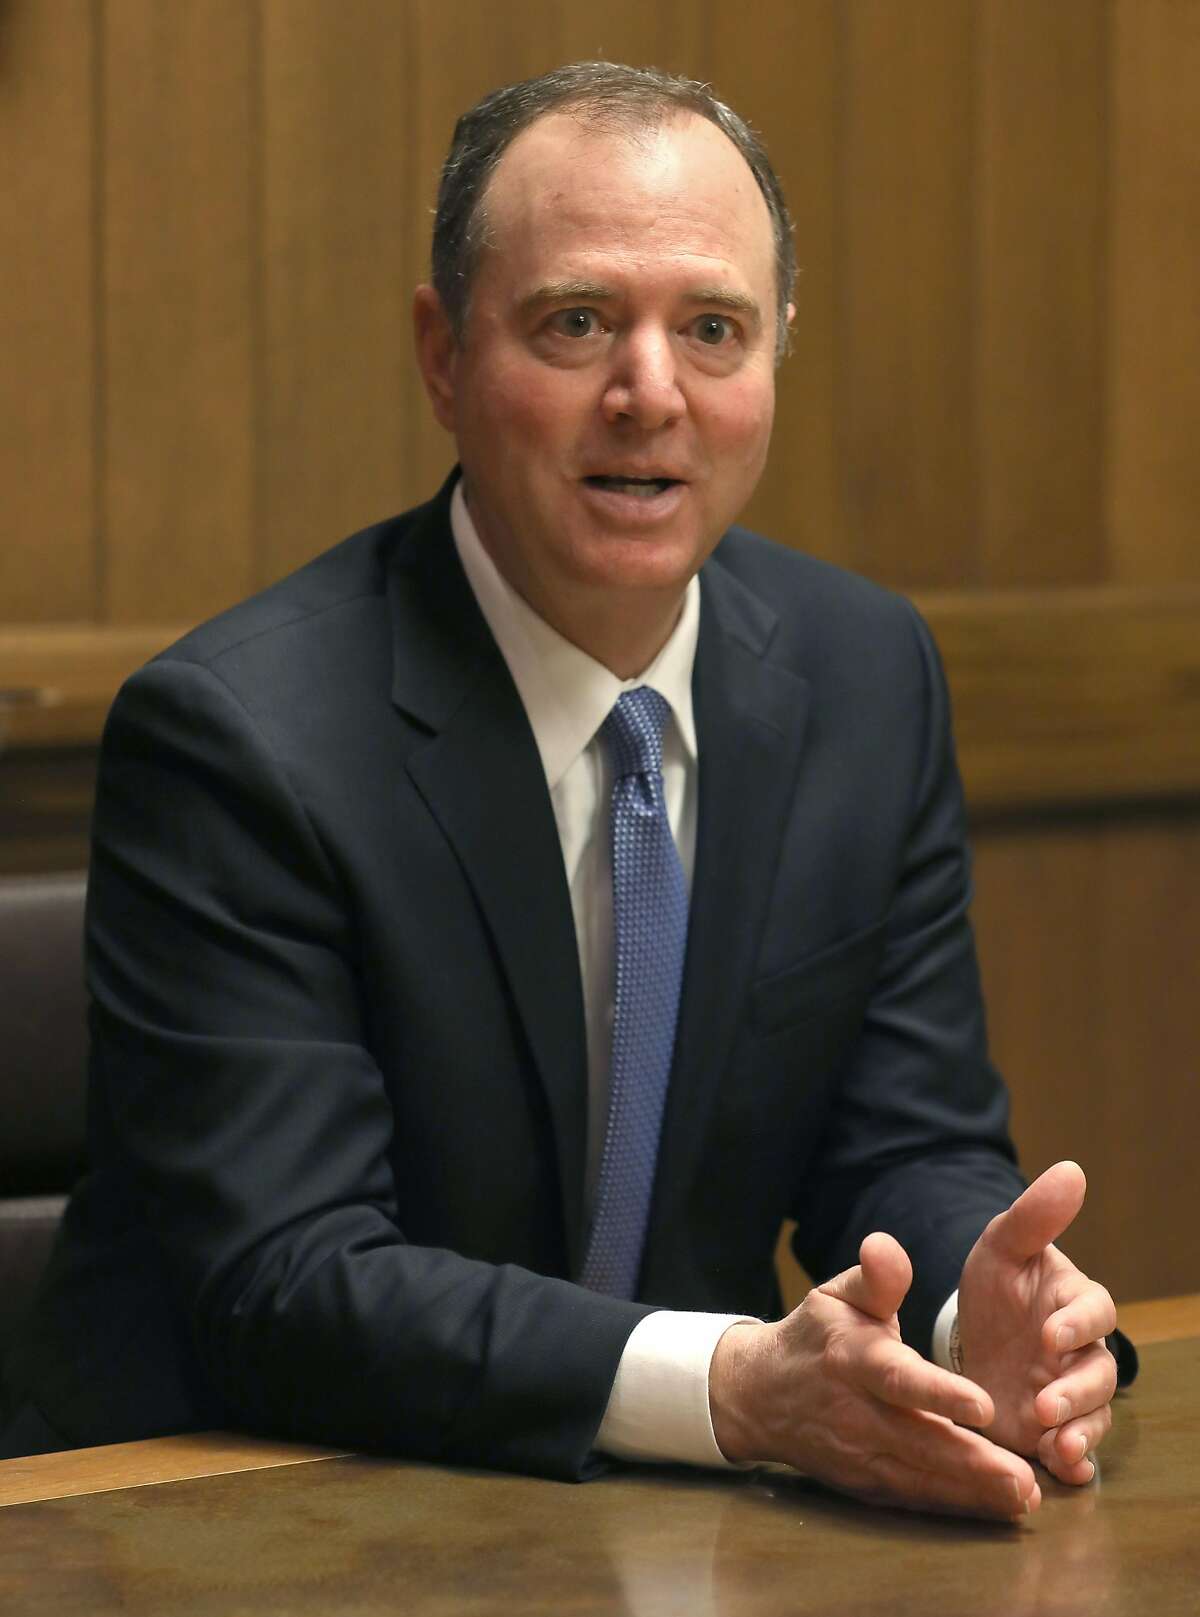 Rep. Adam Schiff, D-Calif., talks to the San Francisco Chronicle editorial board, at the newspaper on Friday, March 22, 2019, in San Francisco, Calif.